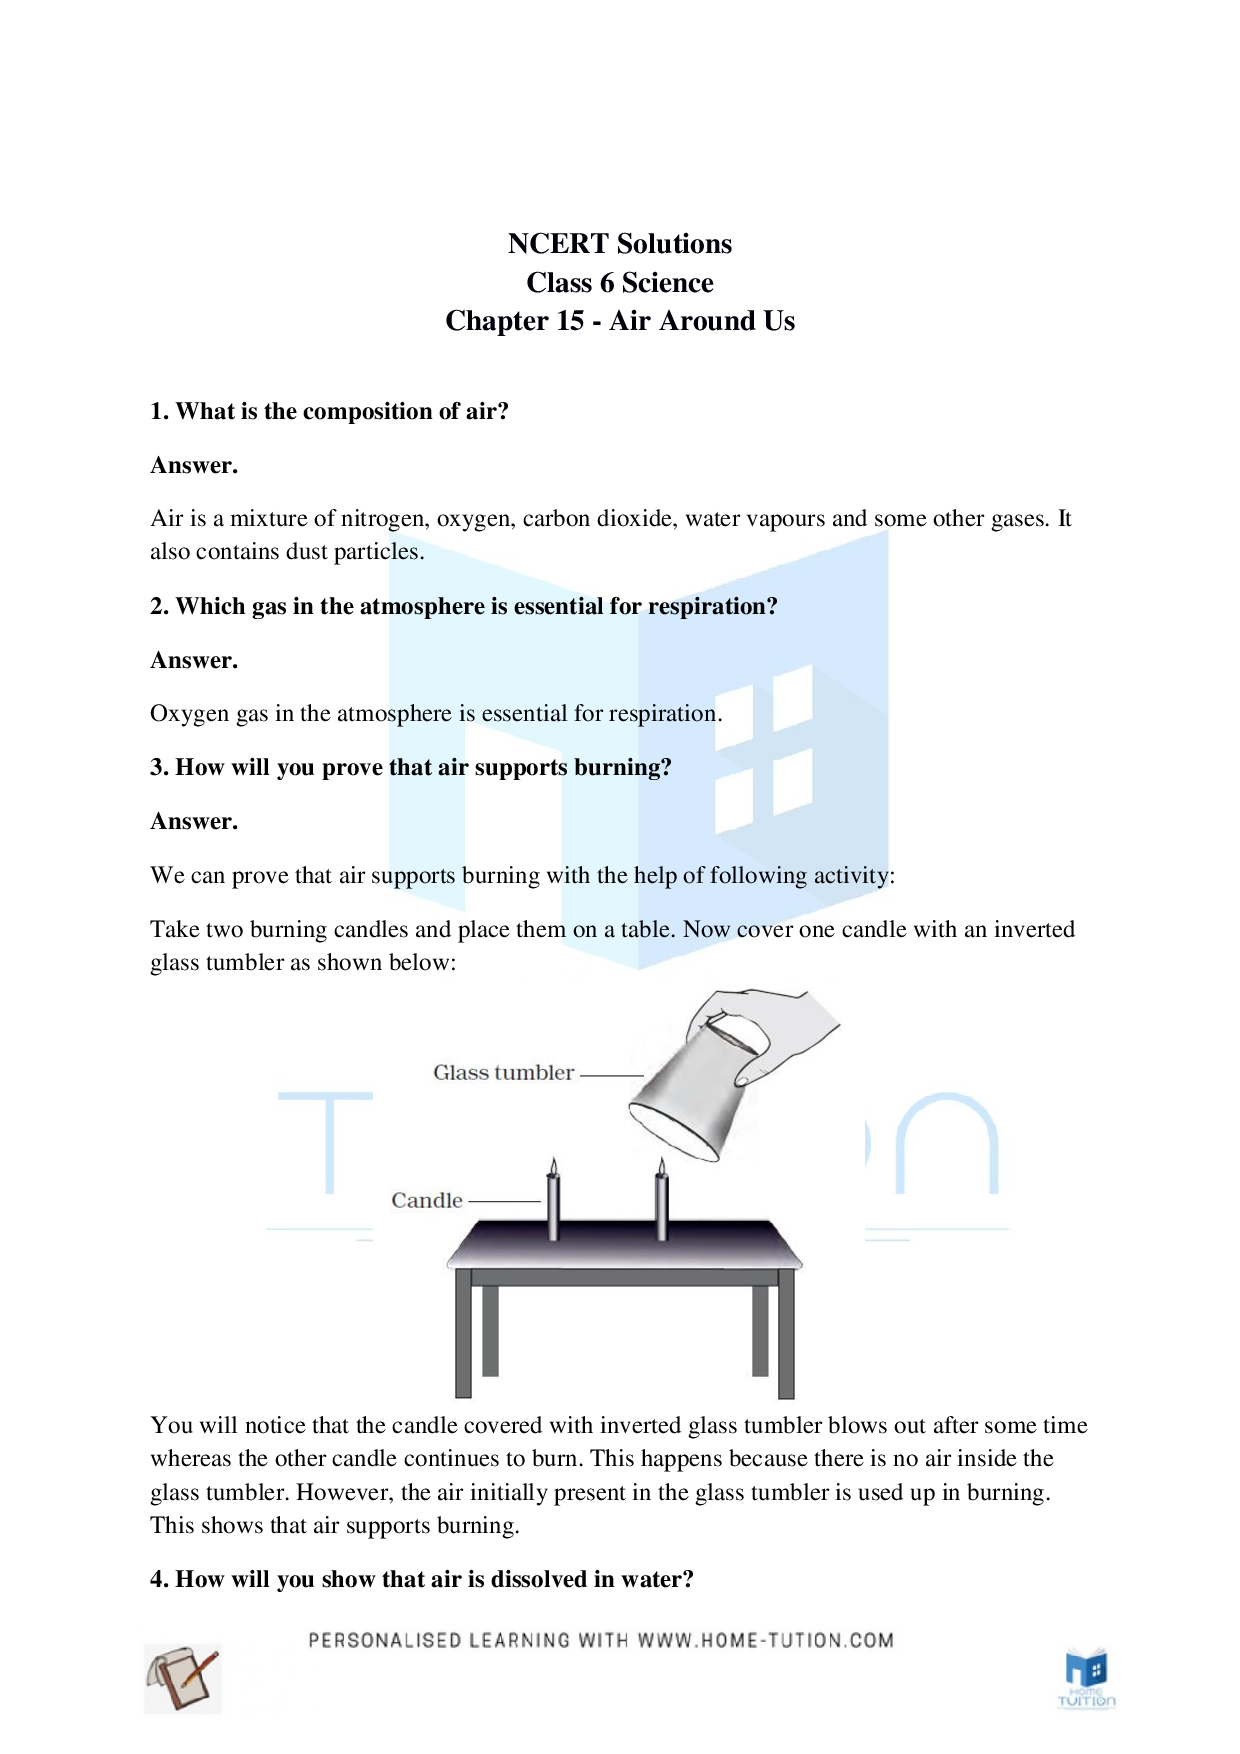 Class 6 Science Chapter 15 Air Around Us